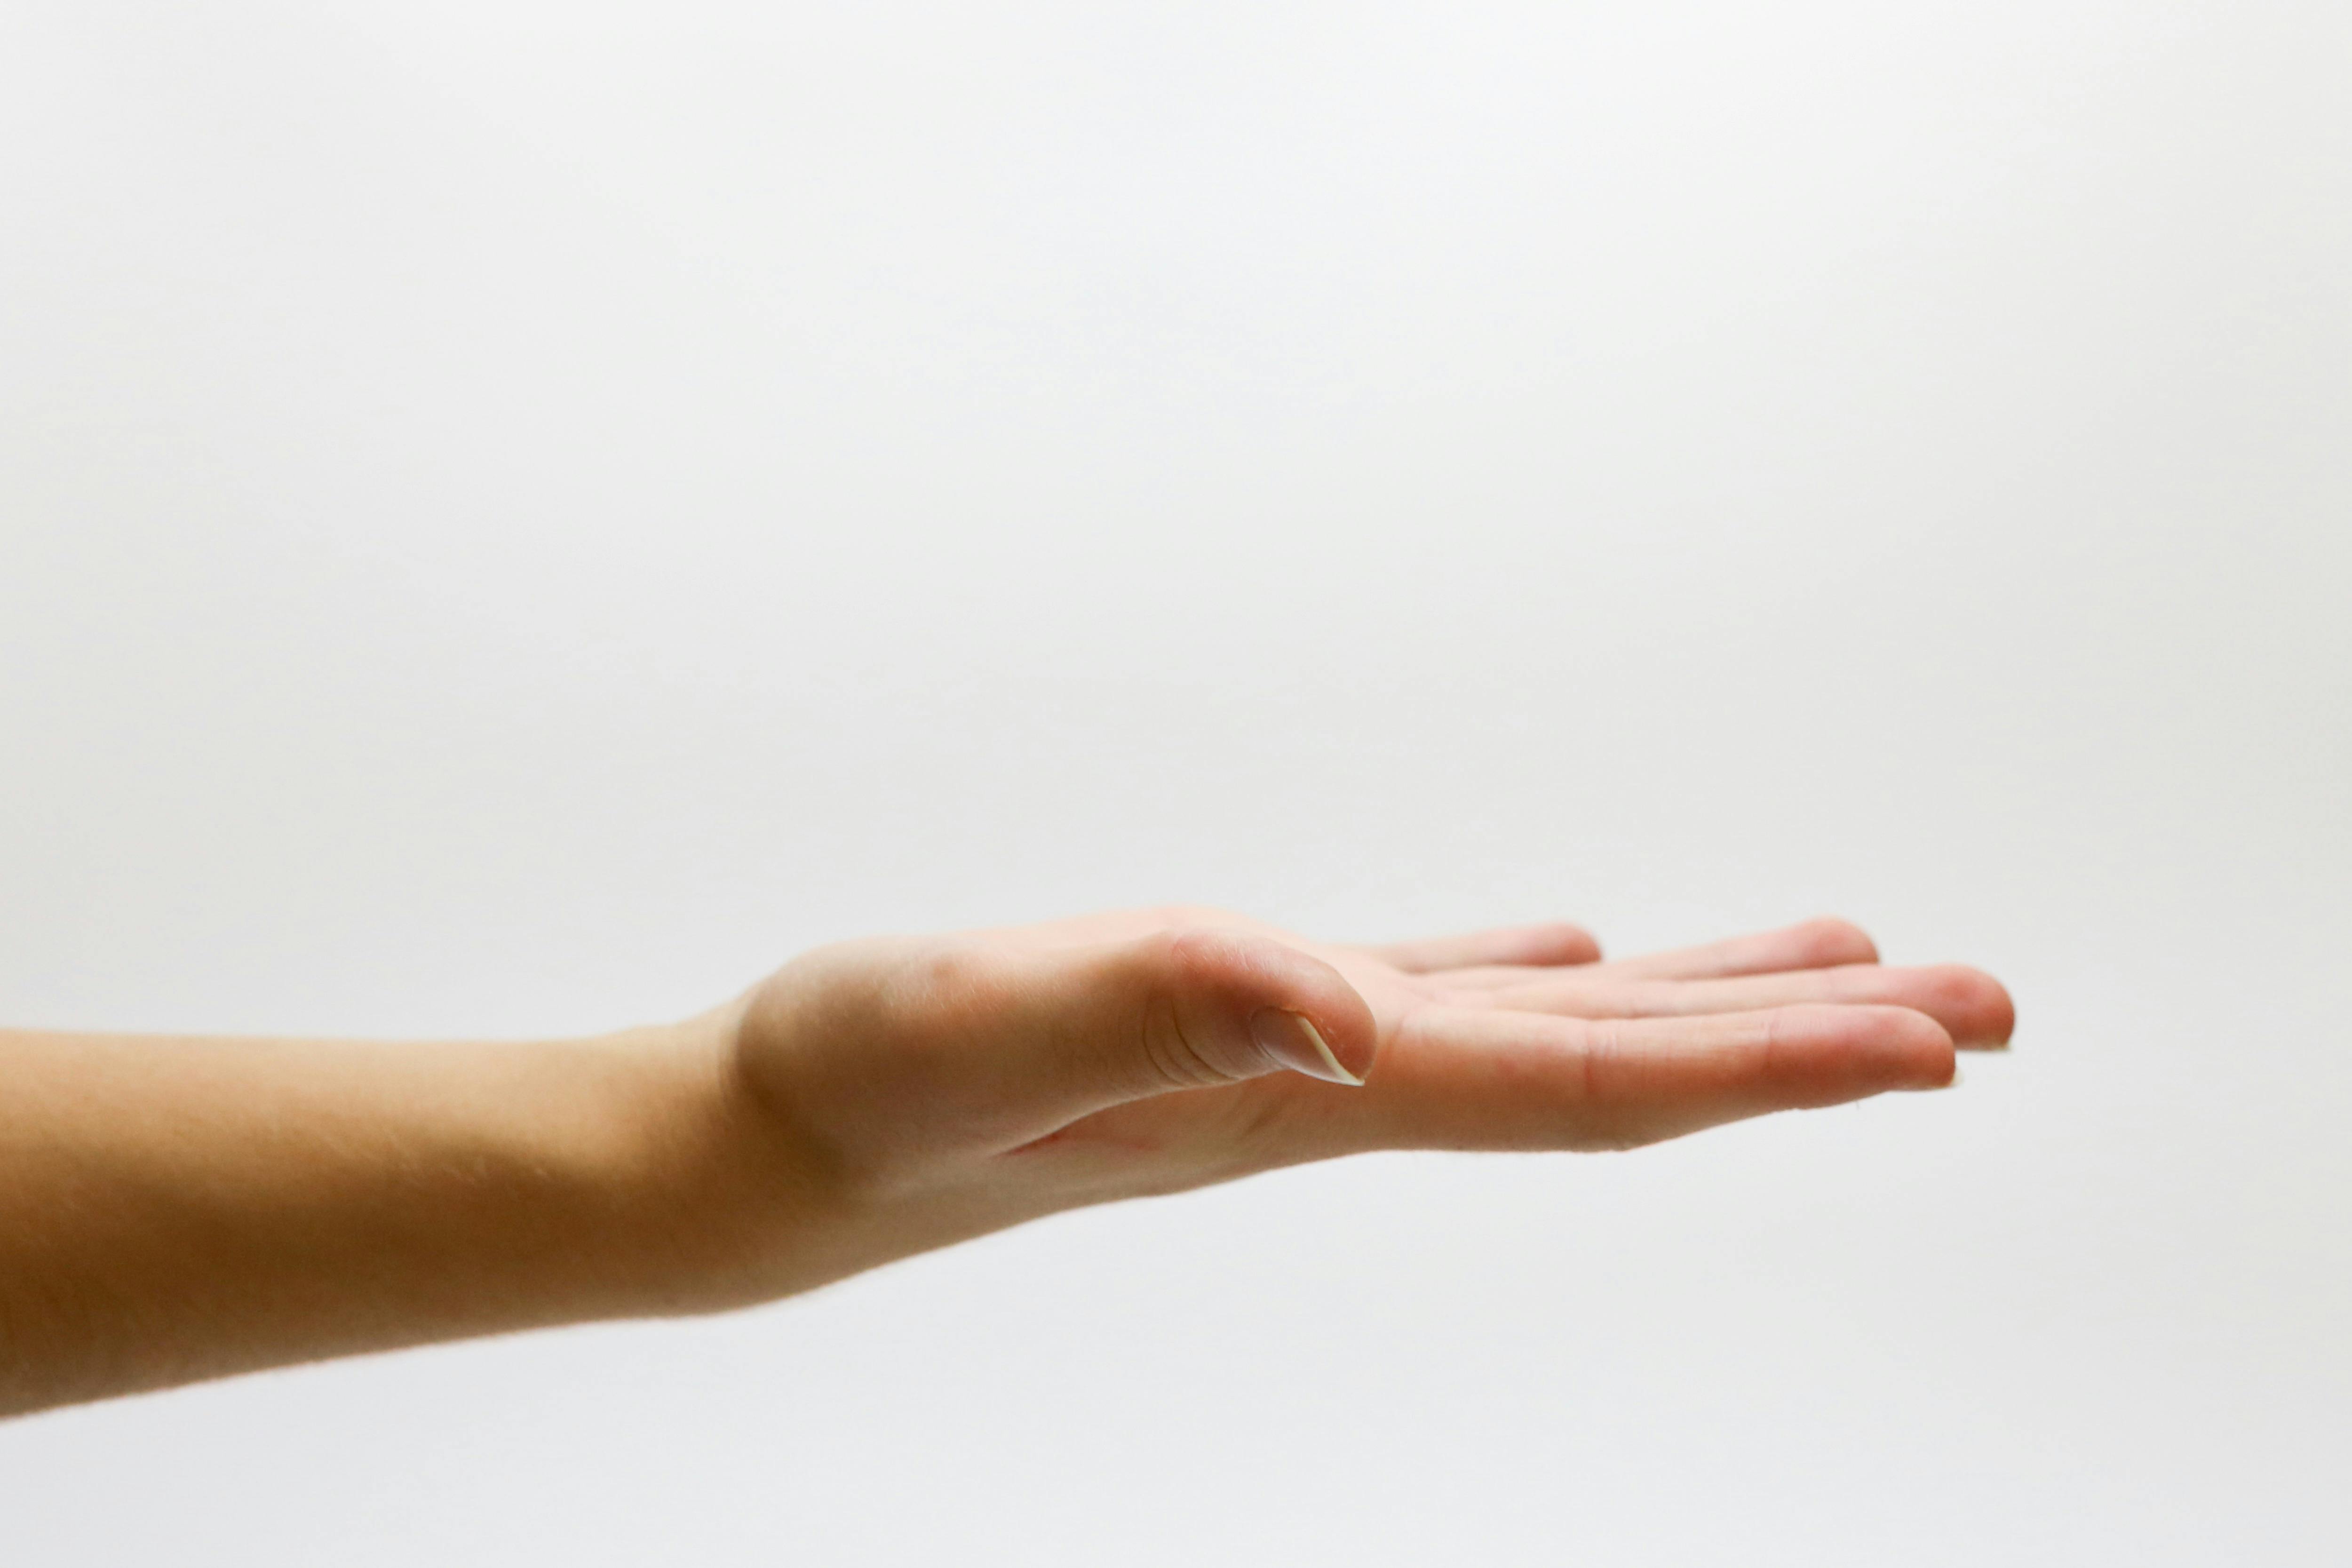 A person holding out their palm | Source: Pexels